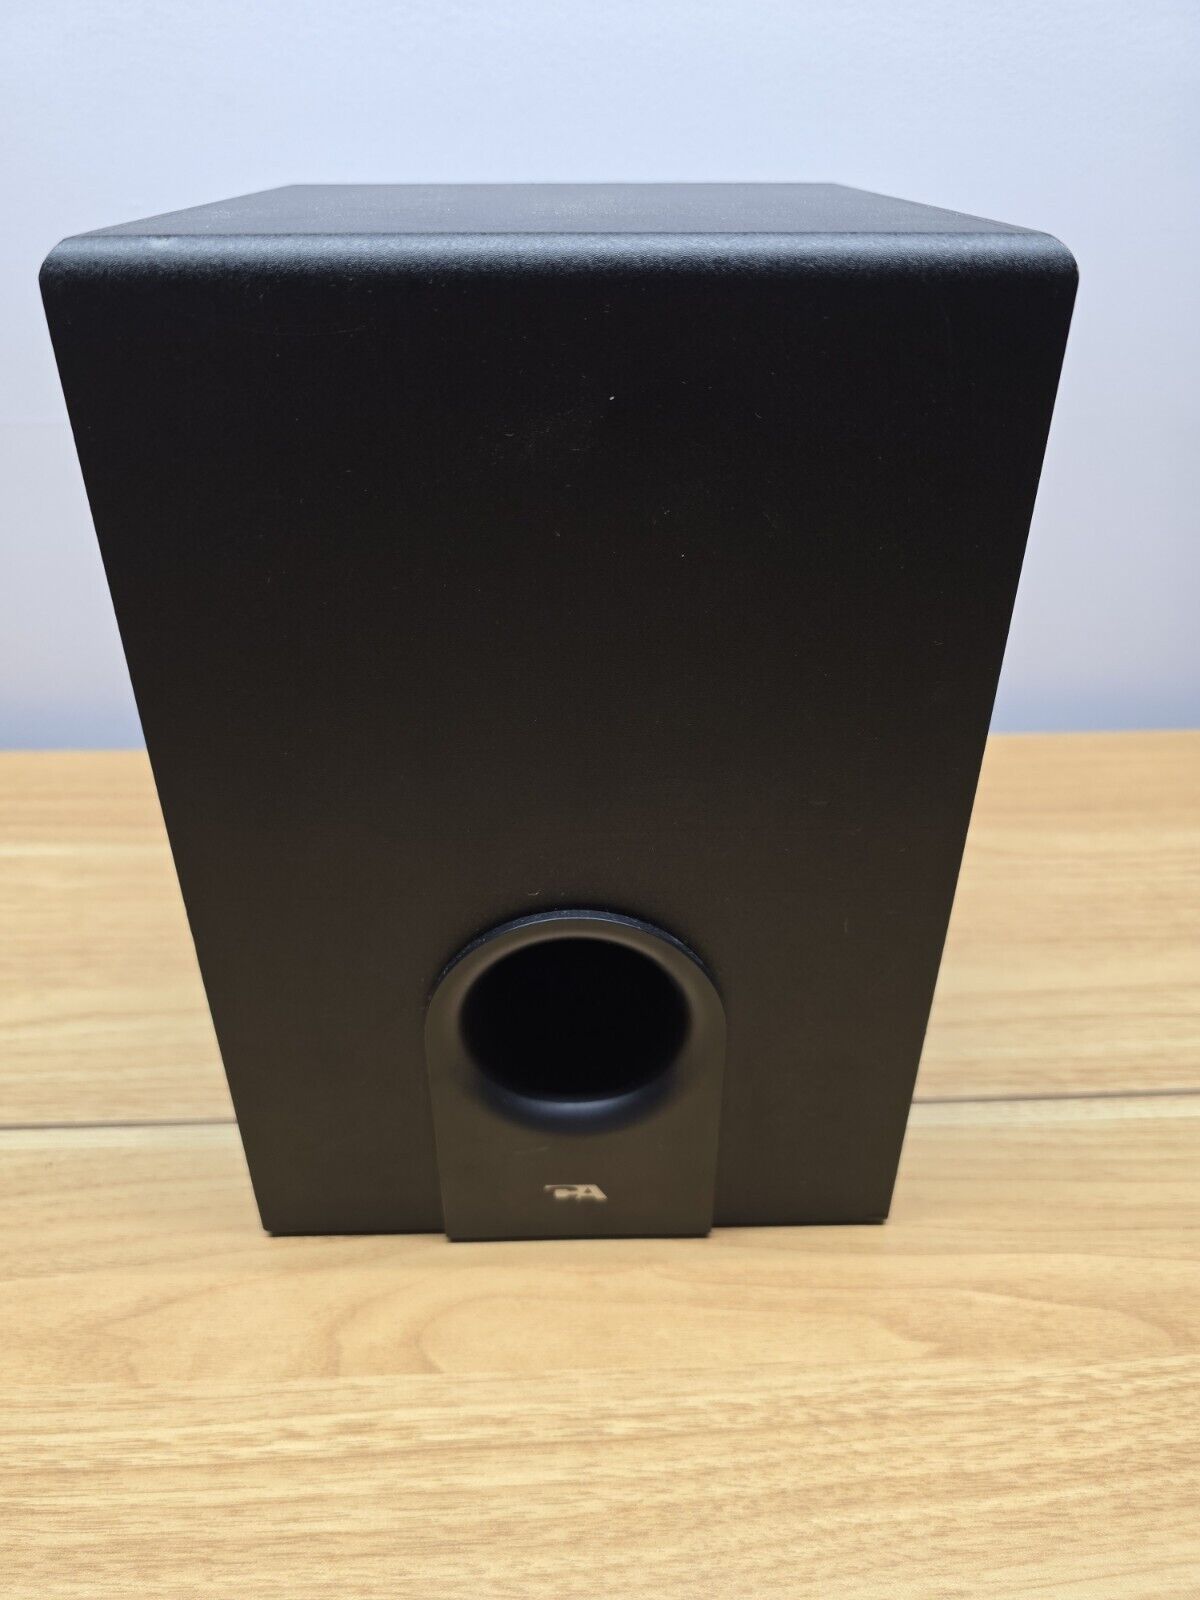 Cyber Acoustics CA-3908 2.1 Stereo Subwoofer - Works